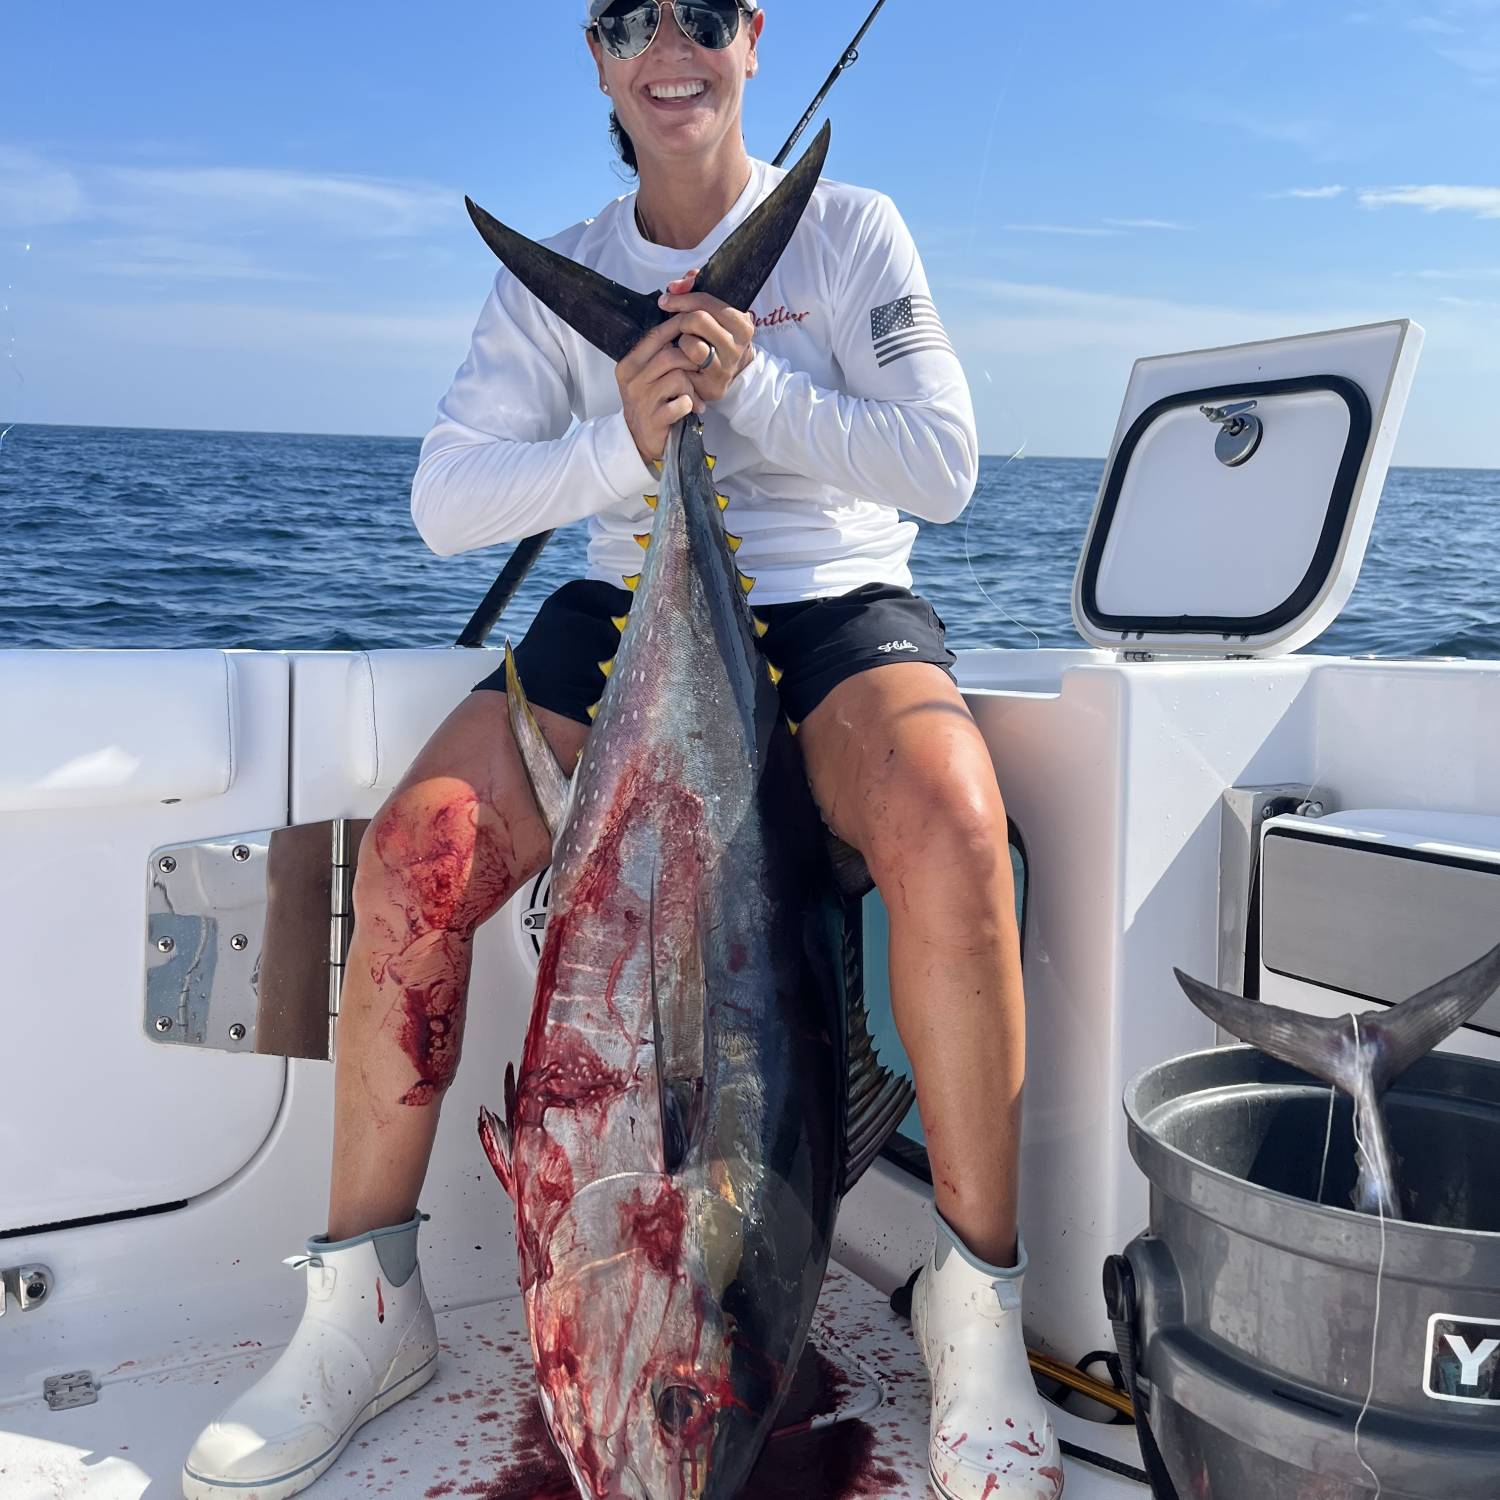 Title: Blood on the deck! - On board their Sportsman Open 322 Center Console - Location: New Jersey. Participating in the Photo Contest #SportsmanJanuary2024